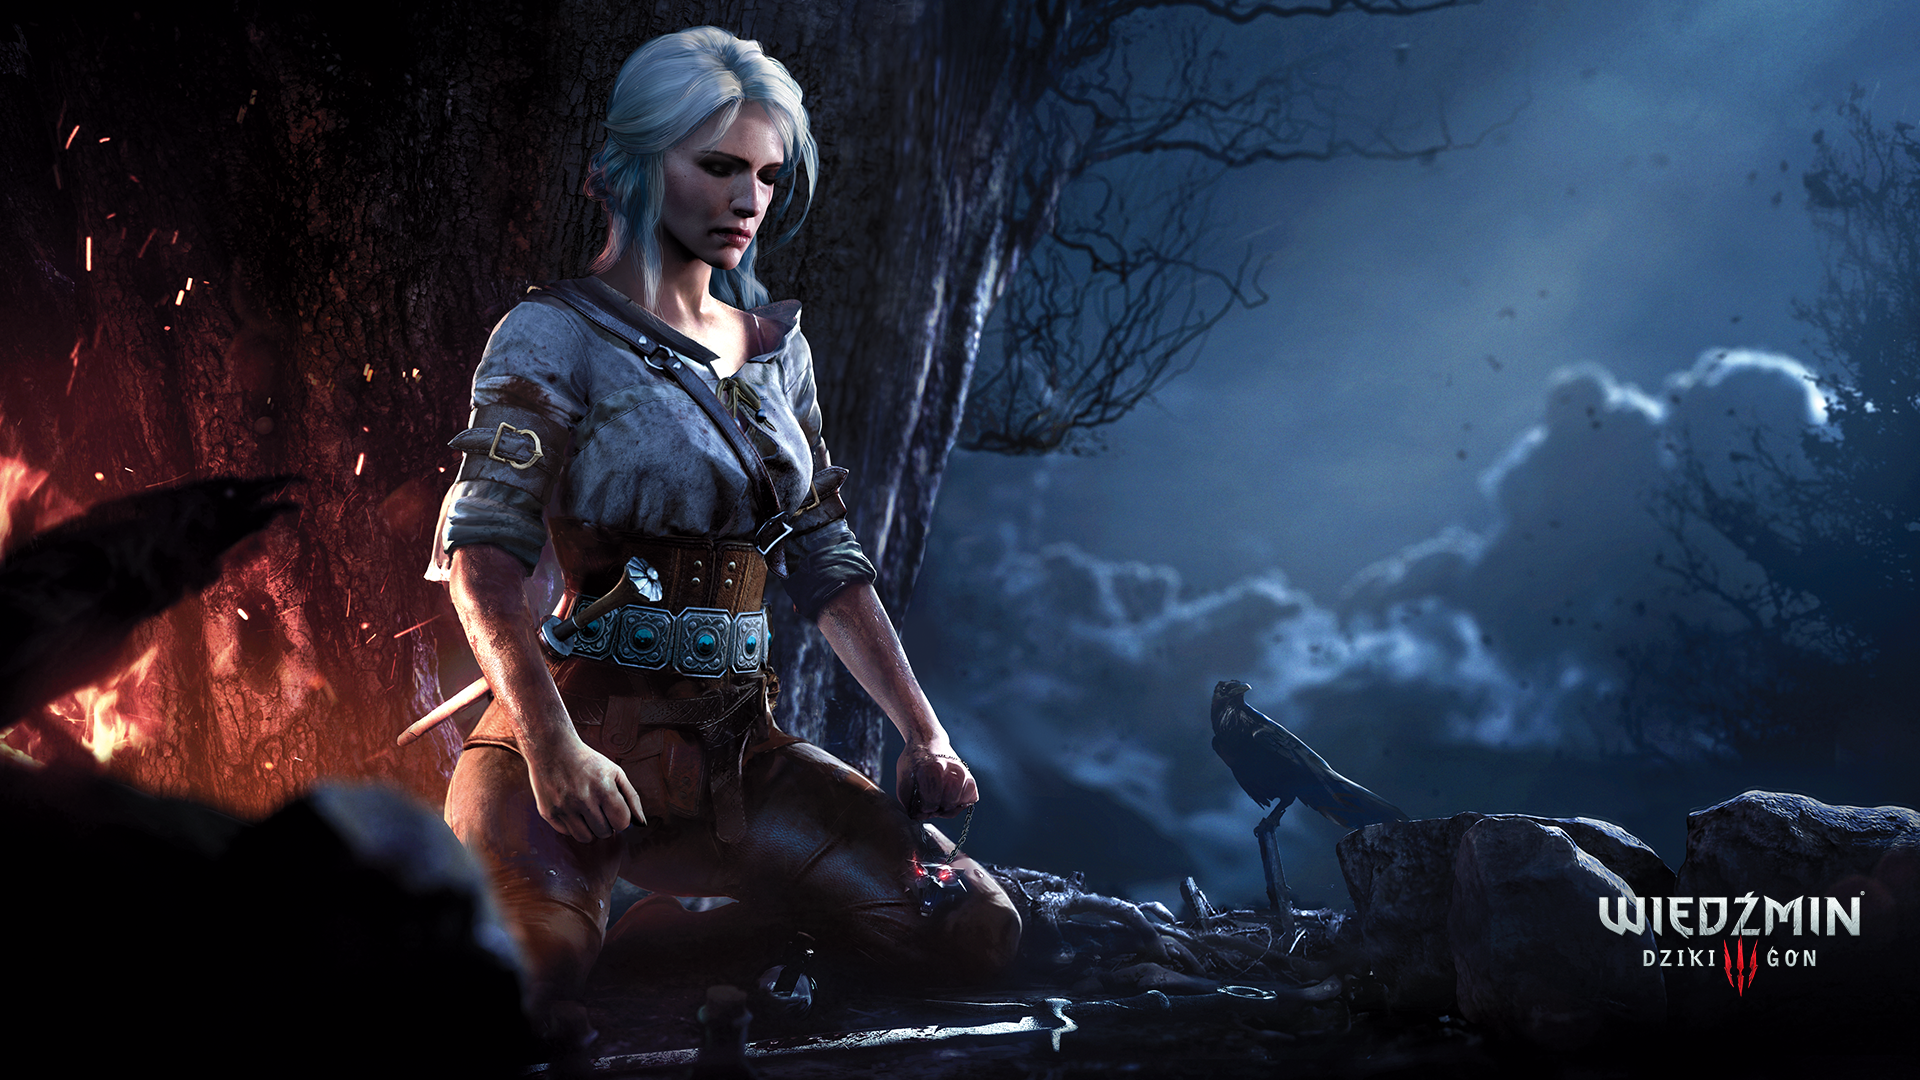 General 1920x1080 The Witcher 3: Wild Hunt Cirilla Fiona Elen Riannon The Witcher video games PC gaming video game girls video game characters RPG